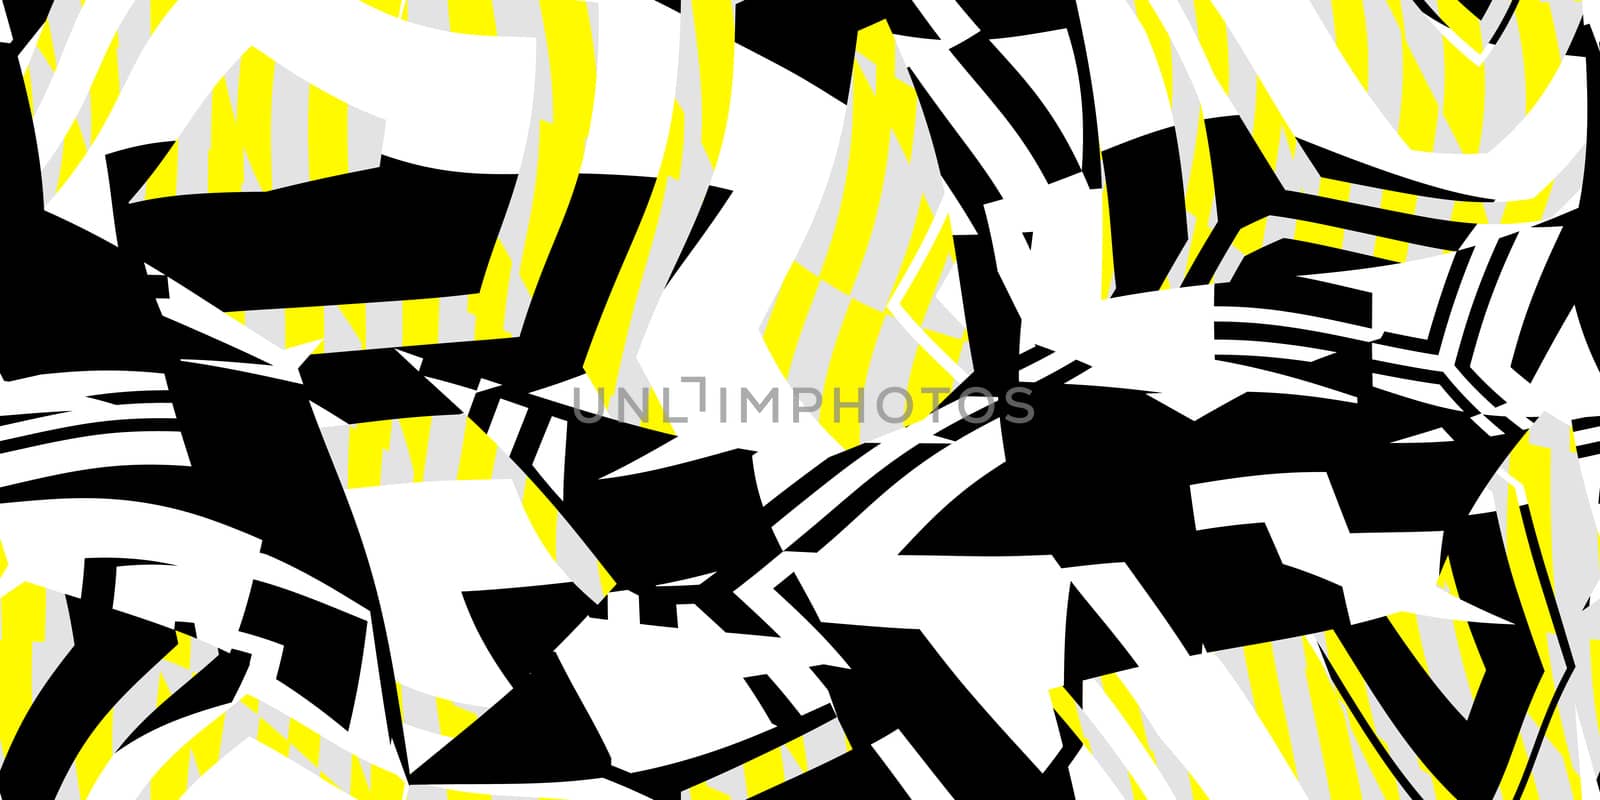 Yellow Seamless Prickly Scraps Background. Sharp Angular Shapes on Monochrome Texture. Prickly Contrast Ragged Flaps Backdrop. by sanches812